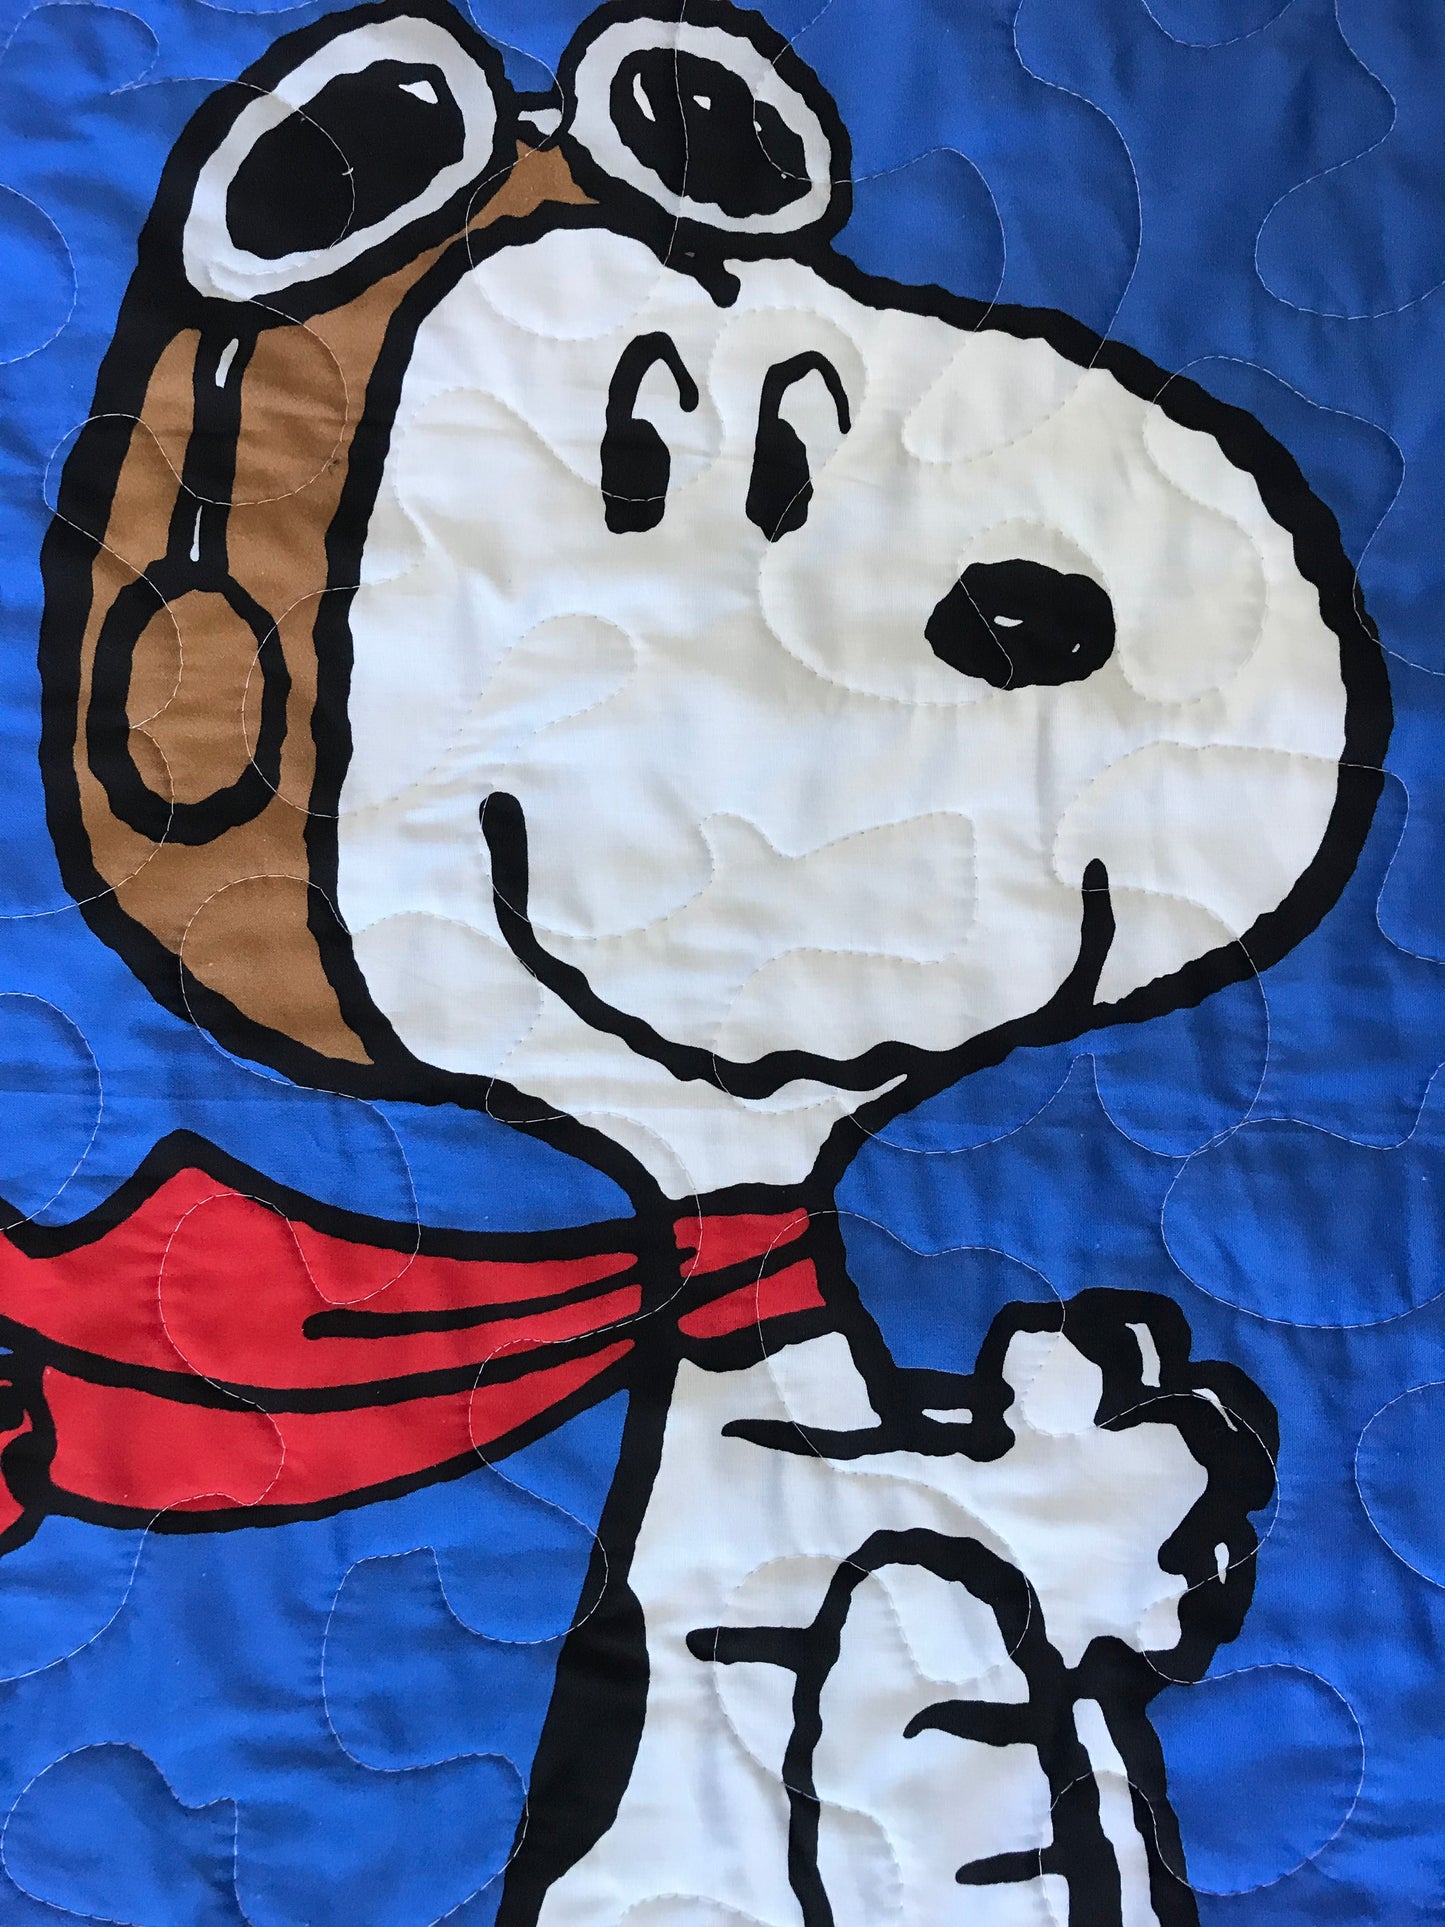 PEANUTS SNOOPY RED BARON Inspired "SNOOPY FLYING ACE" Quilted Blanket 36"X44"